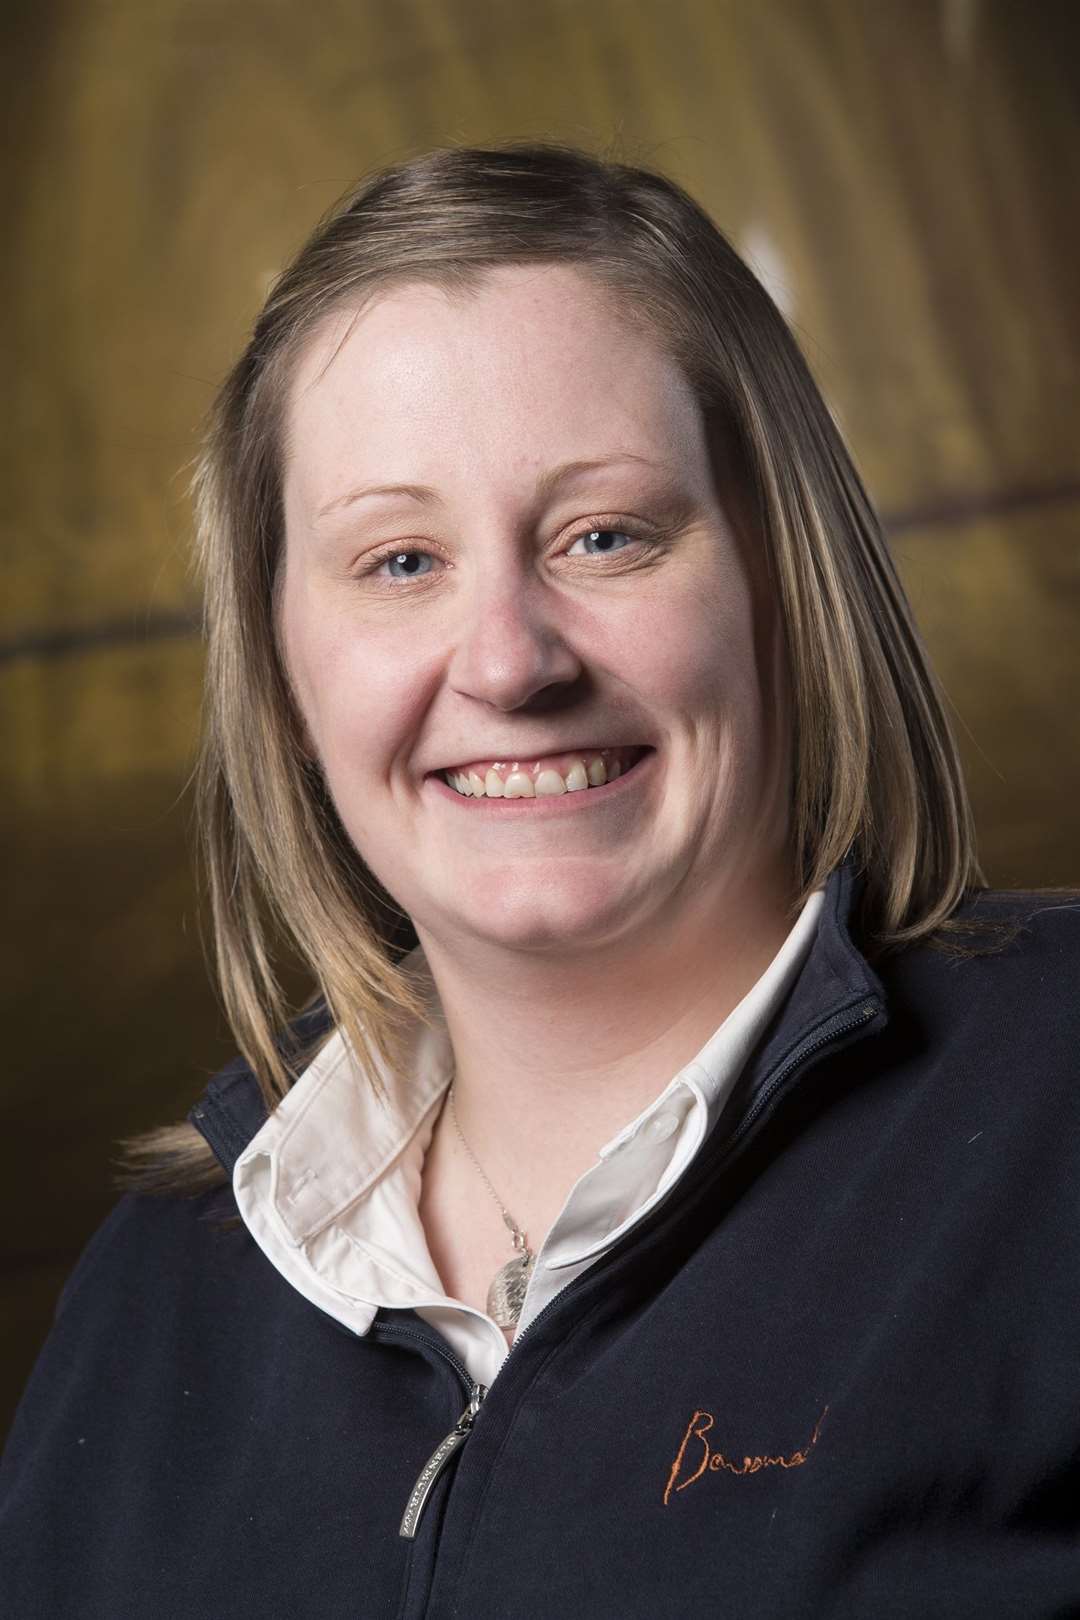 Benromach's Susan Colville wins the title of Visitor Attraction Manager of the Year at the Global Whisky Icons Awards.